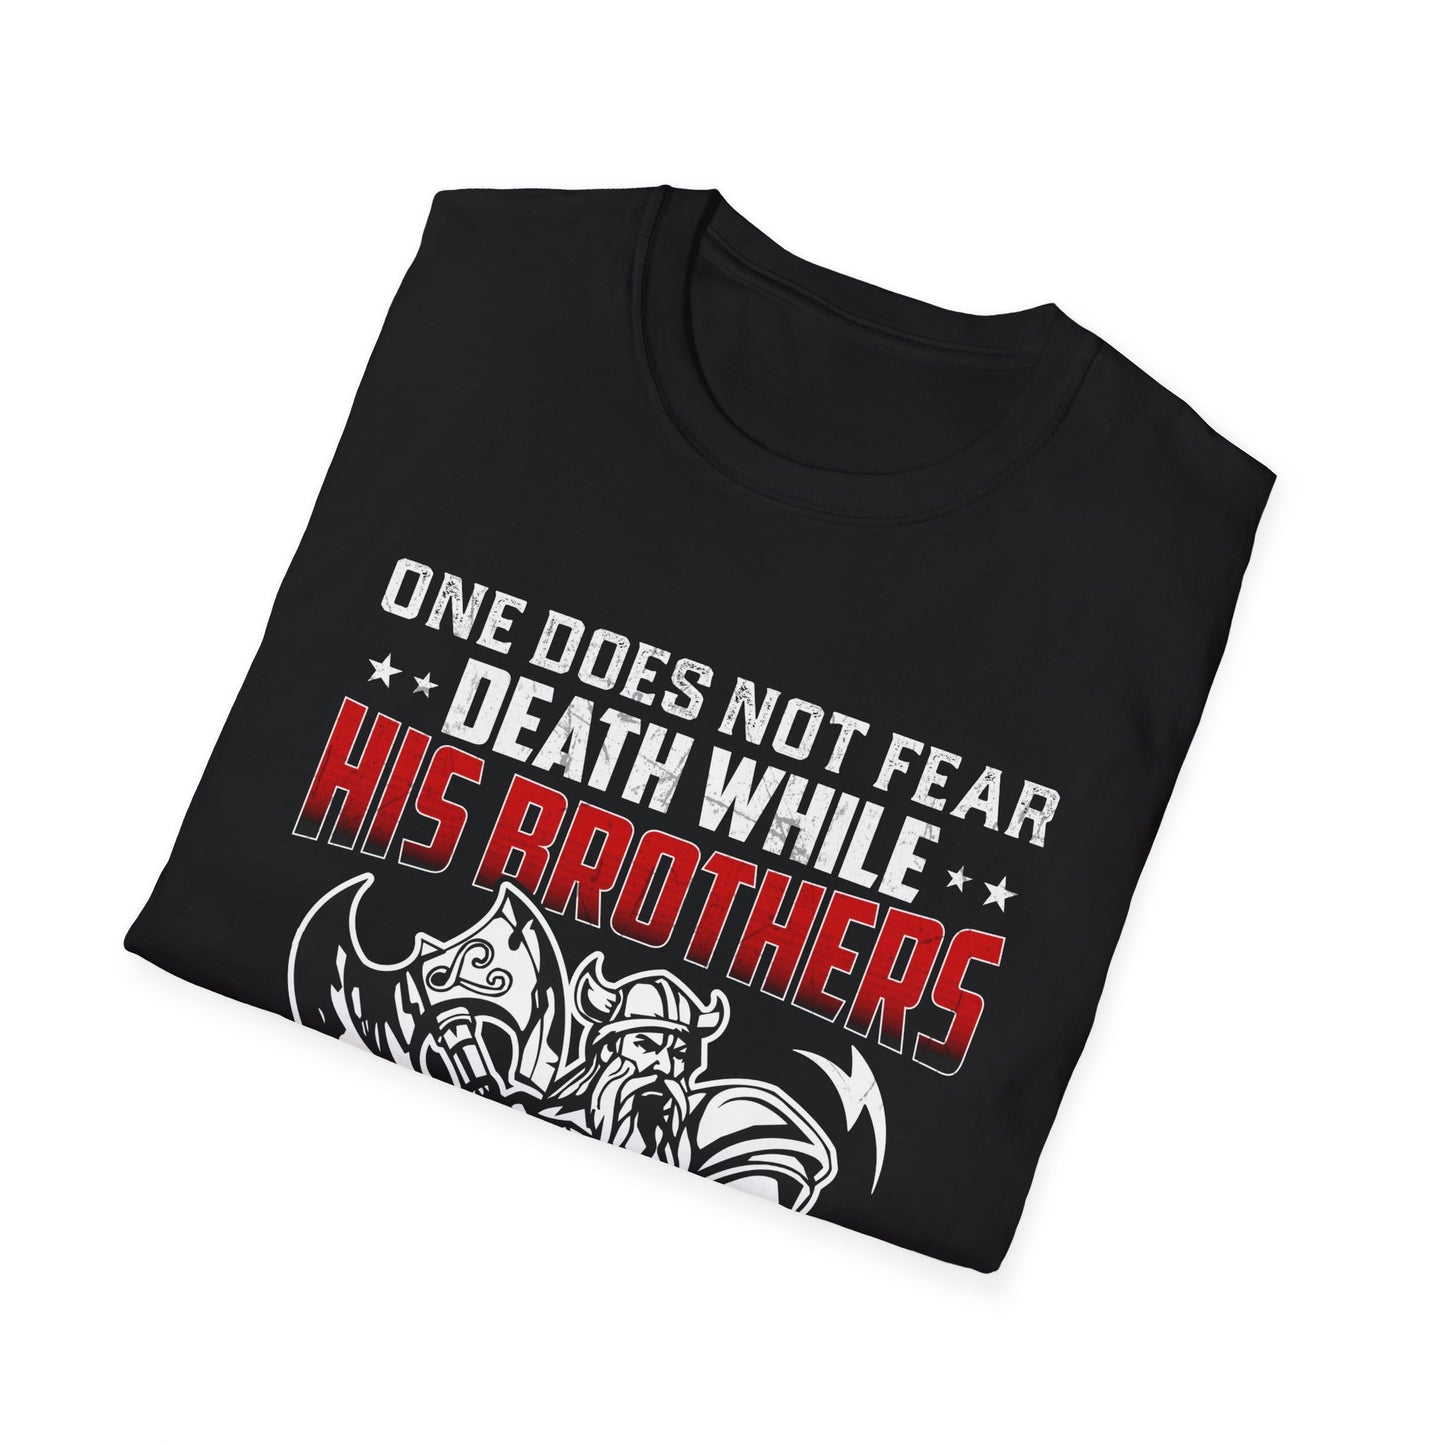 One Does Not Fear Death While His Brothers Await Him In The Halls Of Valhalla T-Shirt